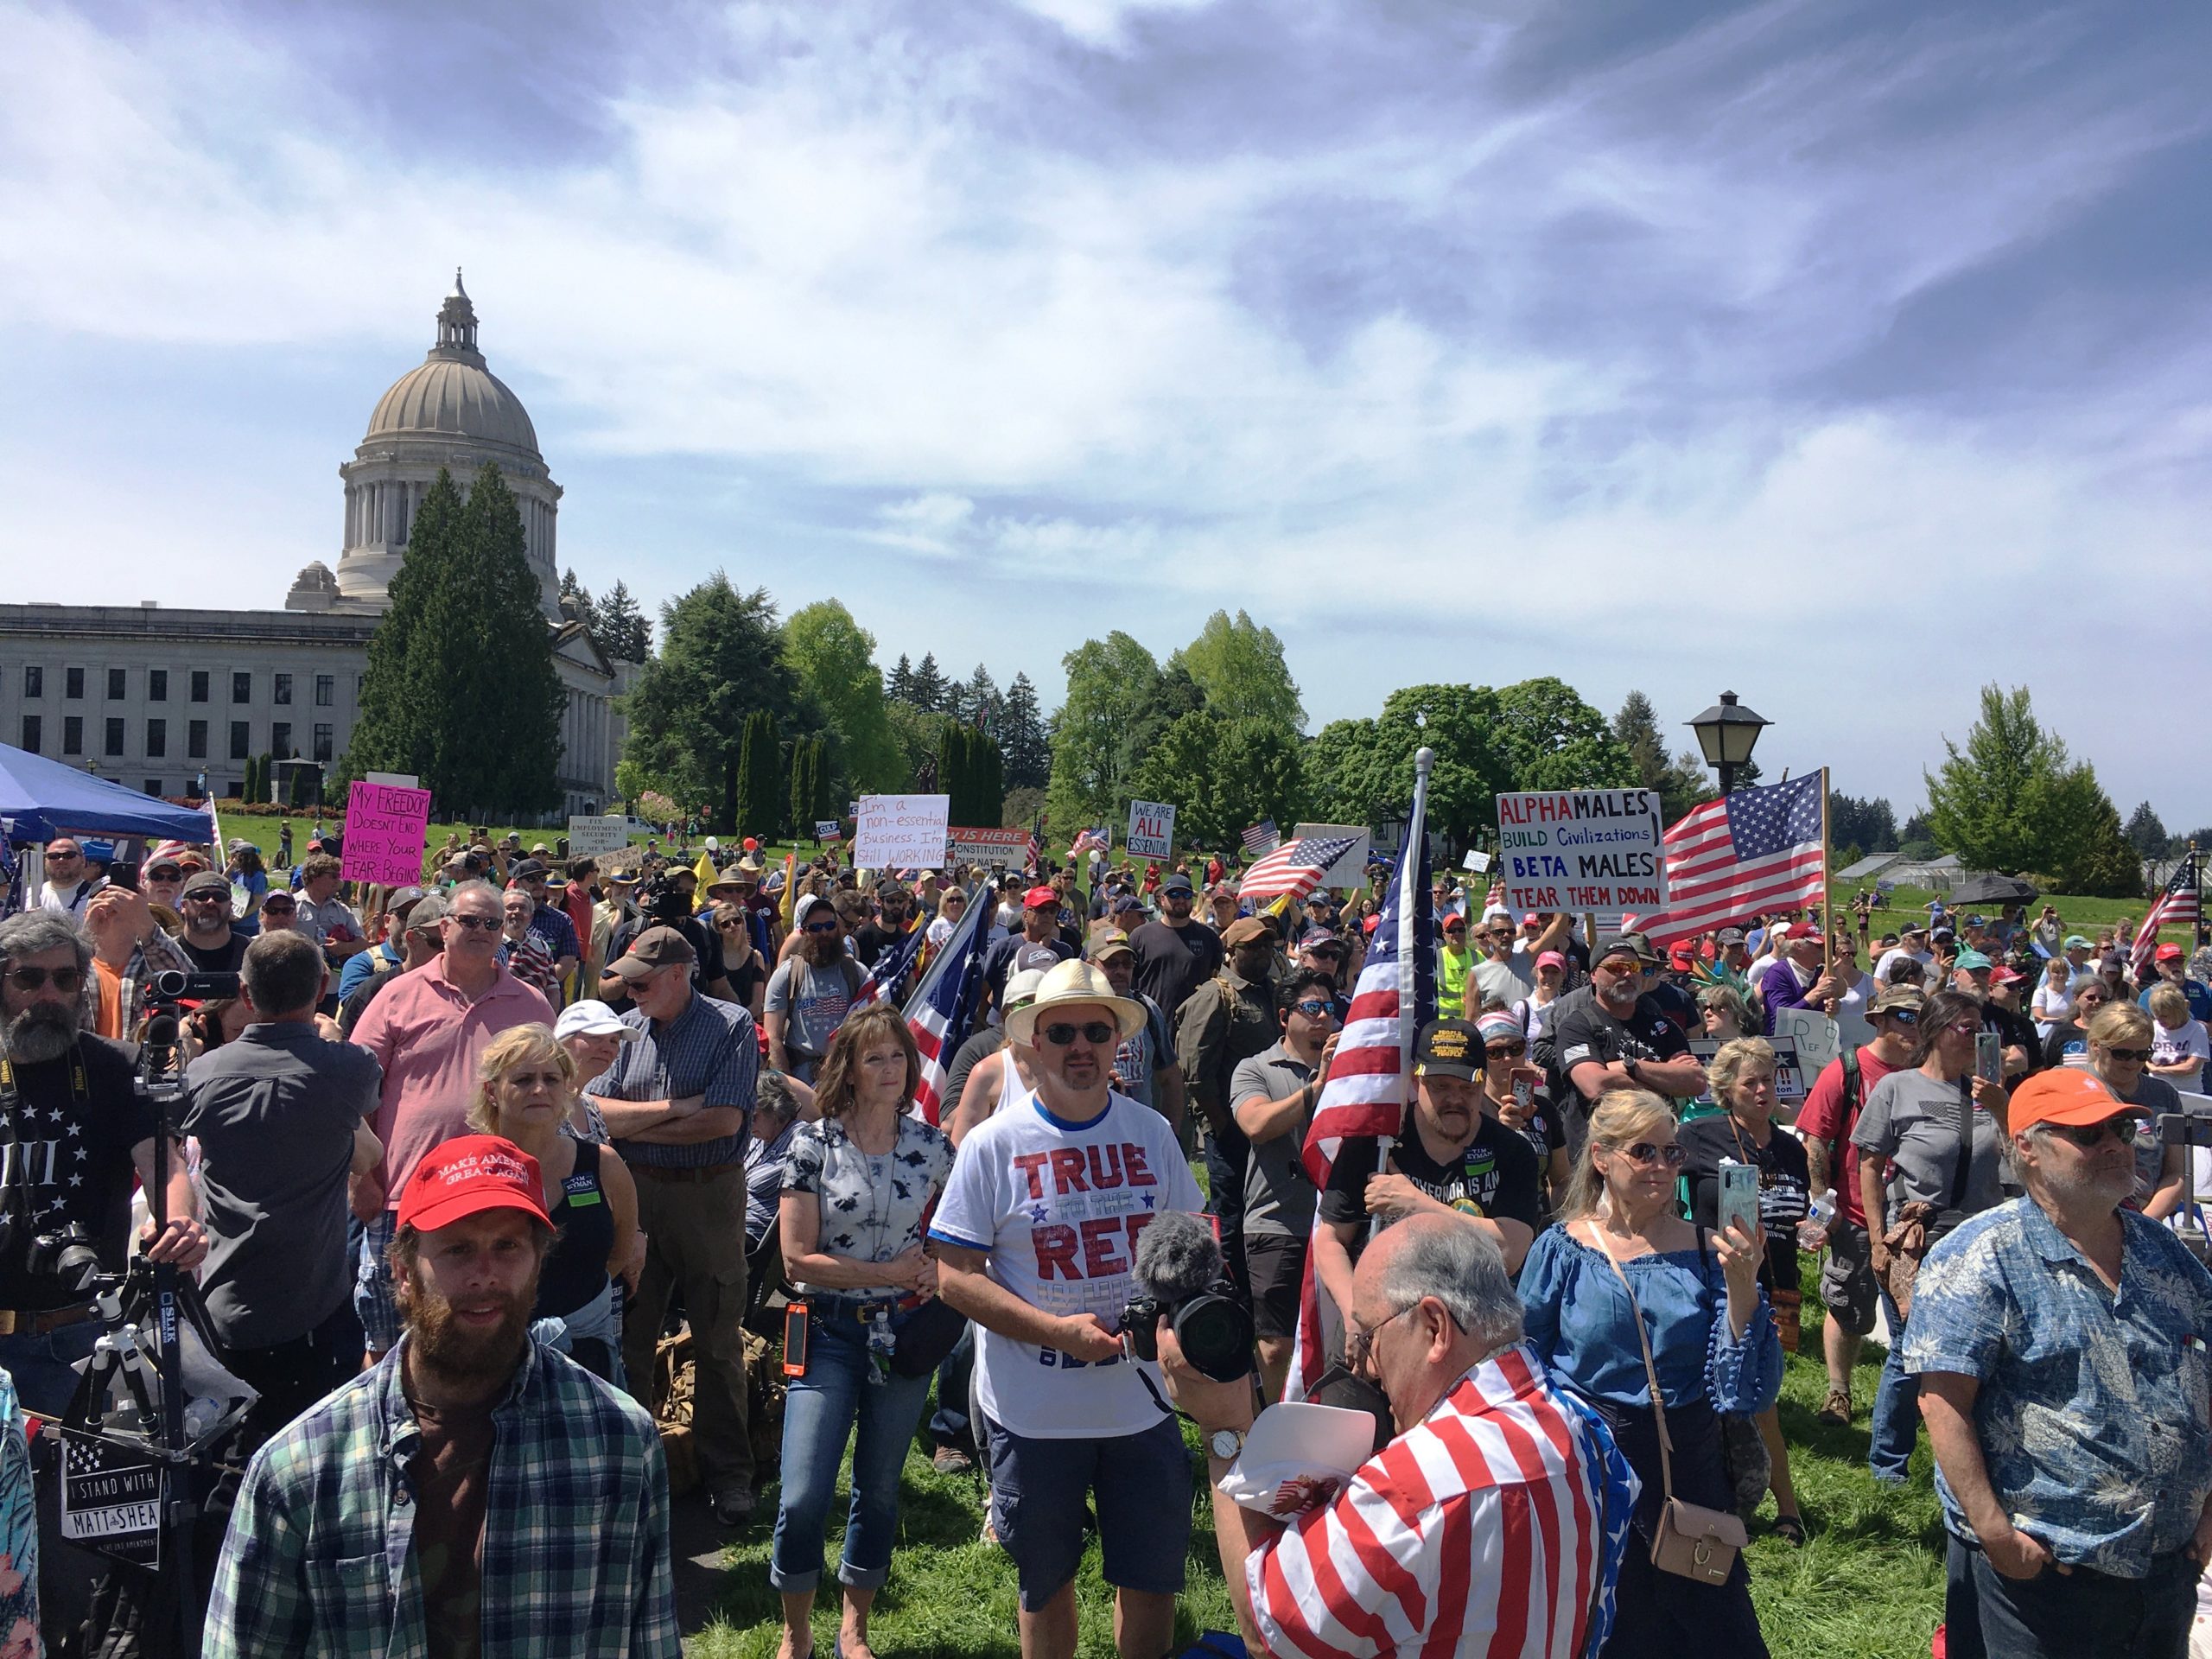 The Washington State Patrol estimated 1,500 people attended an unpermitted "Hazardous Liberty" rally a the Washington state Capitol on Saturday. The rally, like a similar event in April, was held in defiance of Gov. Jay Inslee's ban on large gatherings.